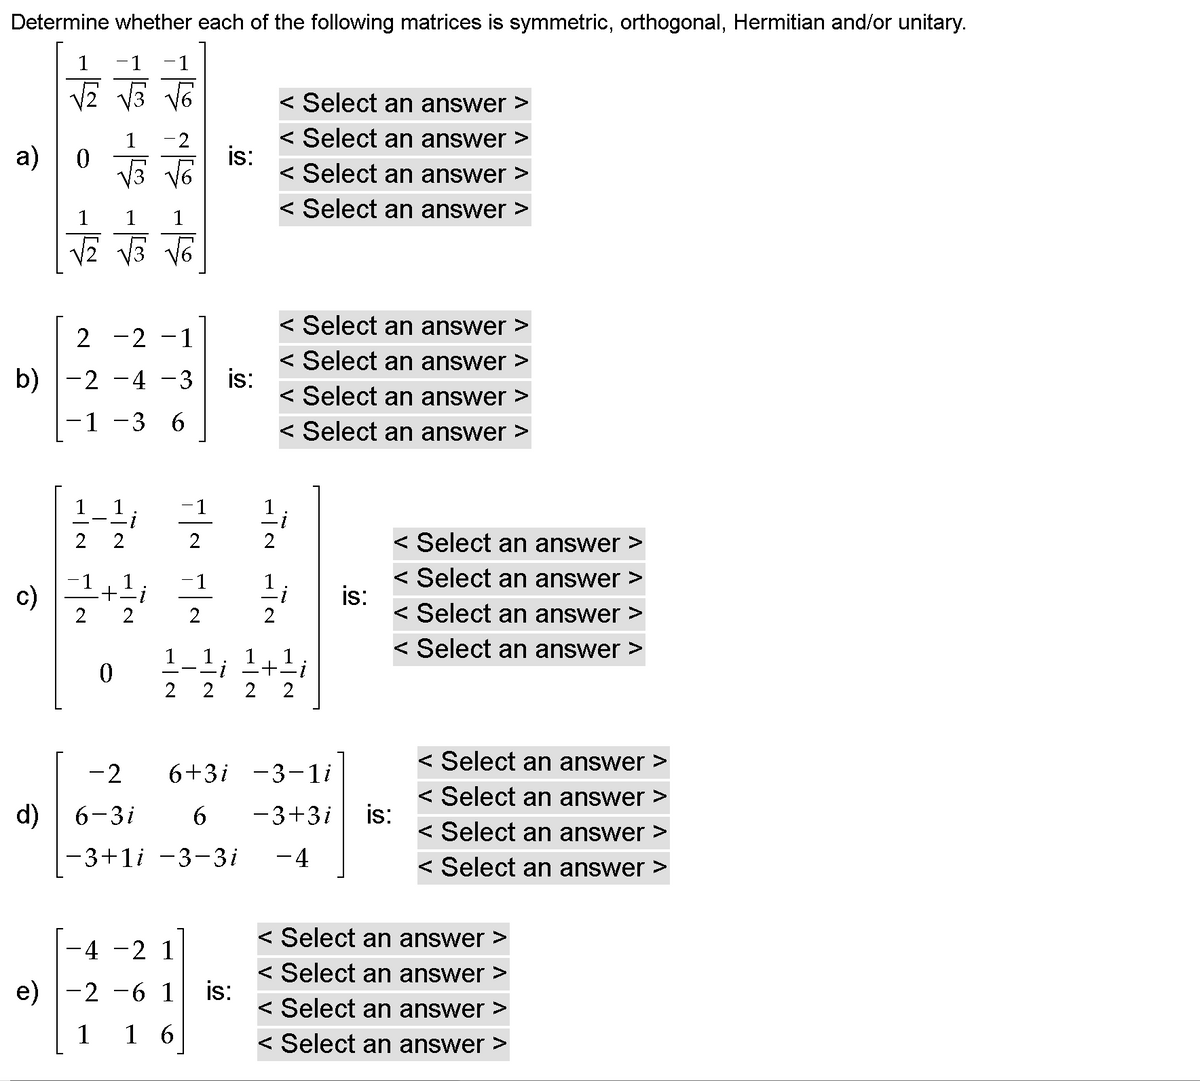 Determine whether each of the following matrices is symmetric, orthogonal, Hermitian and/or unitary.
1
-1
1
< Select an answer >
-2
< Select an answer >
а)
is:
< Select an answer >
< Select an answer >
1
< Select an answer >
-2 -1
< Select an answer >
b) |-2 -4 –3
is:
< Select an answer >
-1 -3 6
< Select an answer >
1
-1
< Select an answer >
< Select an answer >
c)
-1
-1
is:
< Select an answer >
2
< Select an answer >
1
1
< Select an answer >
-2
6+3i -3-1i
< Select an answer >
is:
< Select an answer >
d)
6-3i
6.
-3+3i
-3+1i -3-3i
- 4
< Select an answer >
< Select an answer >
4 -2 1
< Select an answer >
e) |-2
6 1
is:
< Select an answer >
1
1 6
< Select an answer >
